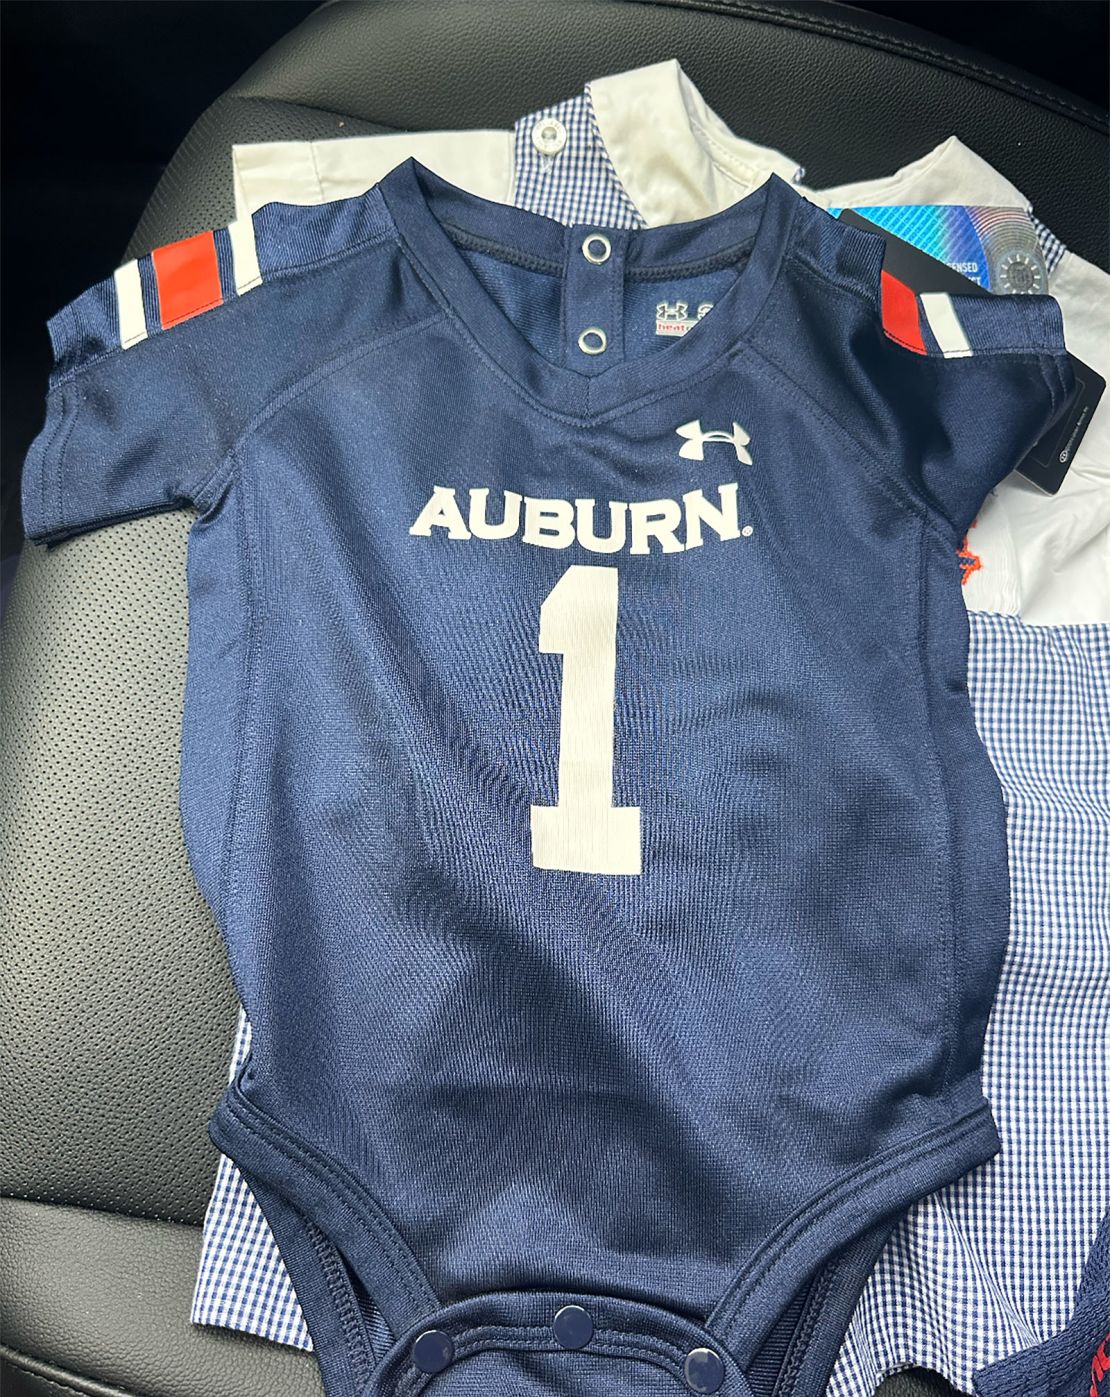 The Goidels are college football fans and bought an Auburn onesie for good luck ahead of their IVF journey.